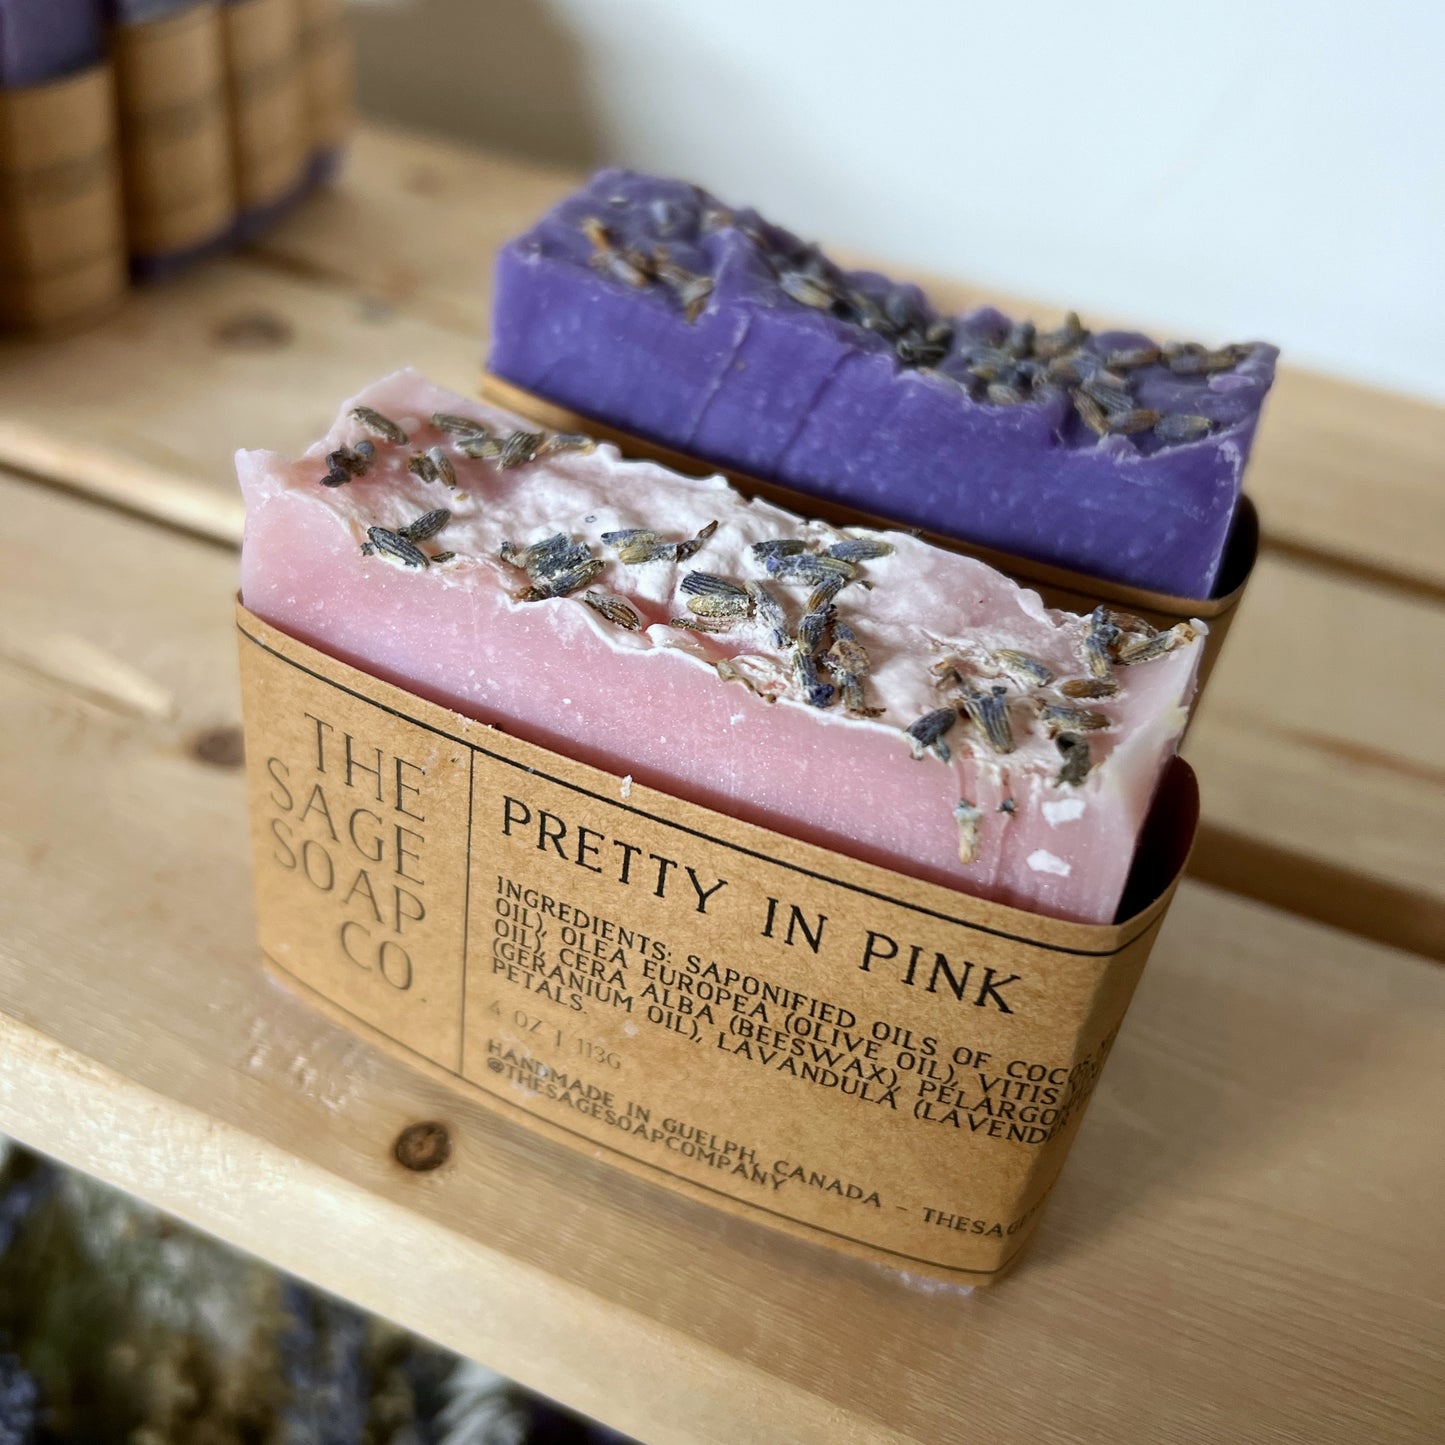 Two bars of soap, one pink and one purple, with lavender buds on top. Pink soap has a brown cardstock label with "Pretty in Pink" text